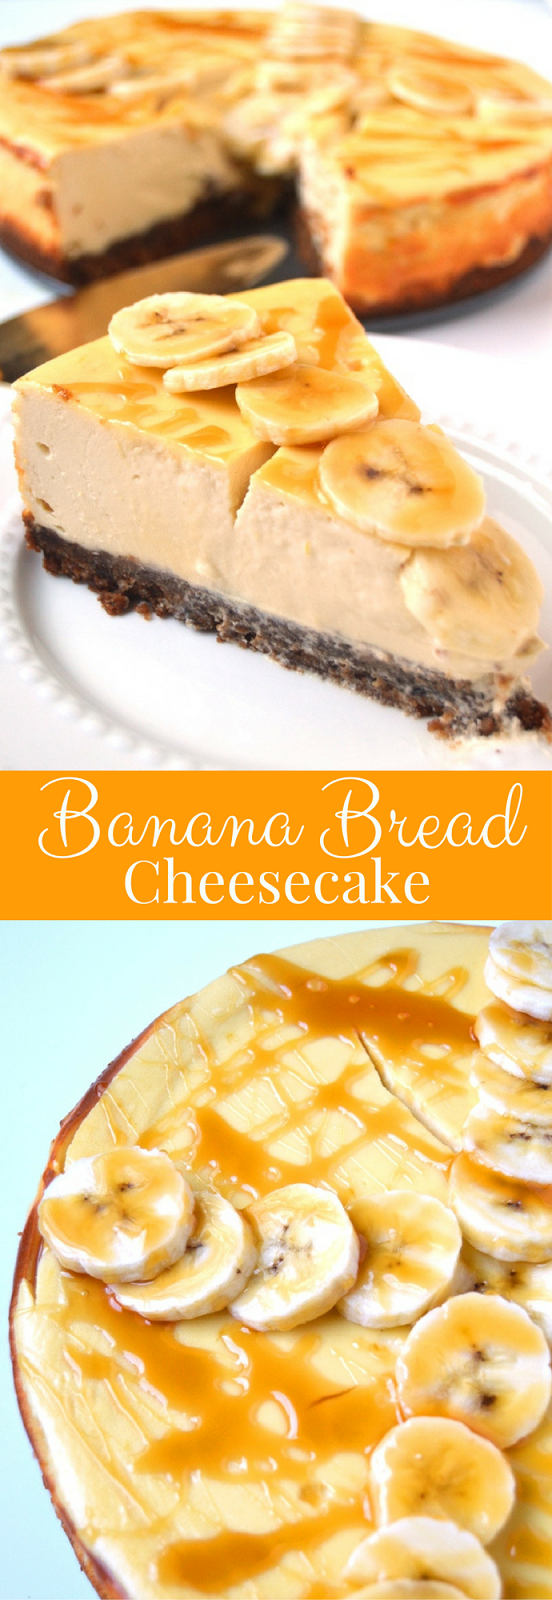 Banana Bread Cheesecake features a rich, creamy, Greek yogurt cheesecake with a banana bread crust combining two of your favorite treats in one for the perfect dessert! www.nutritionistreviews.com